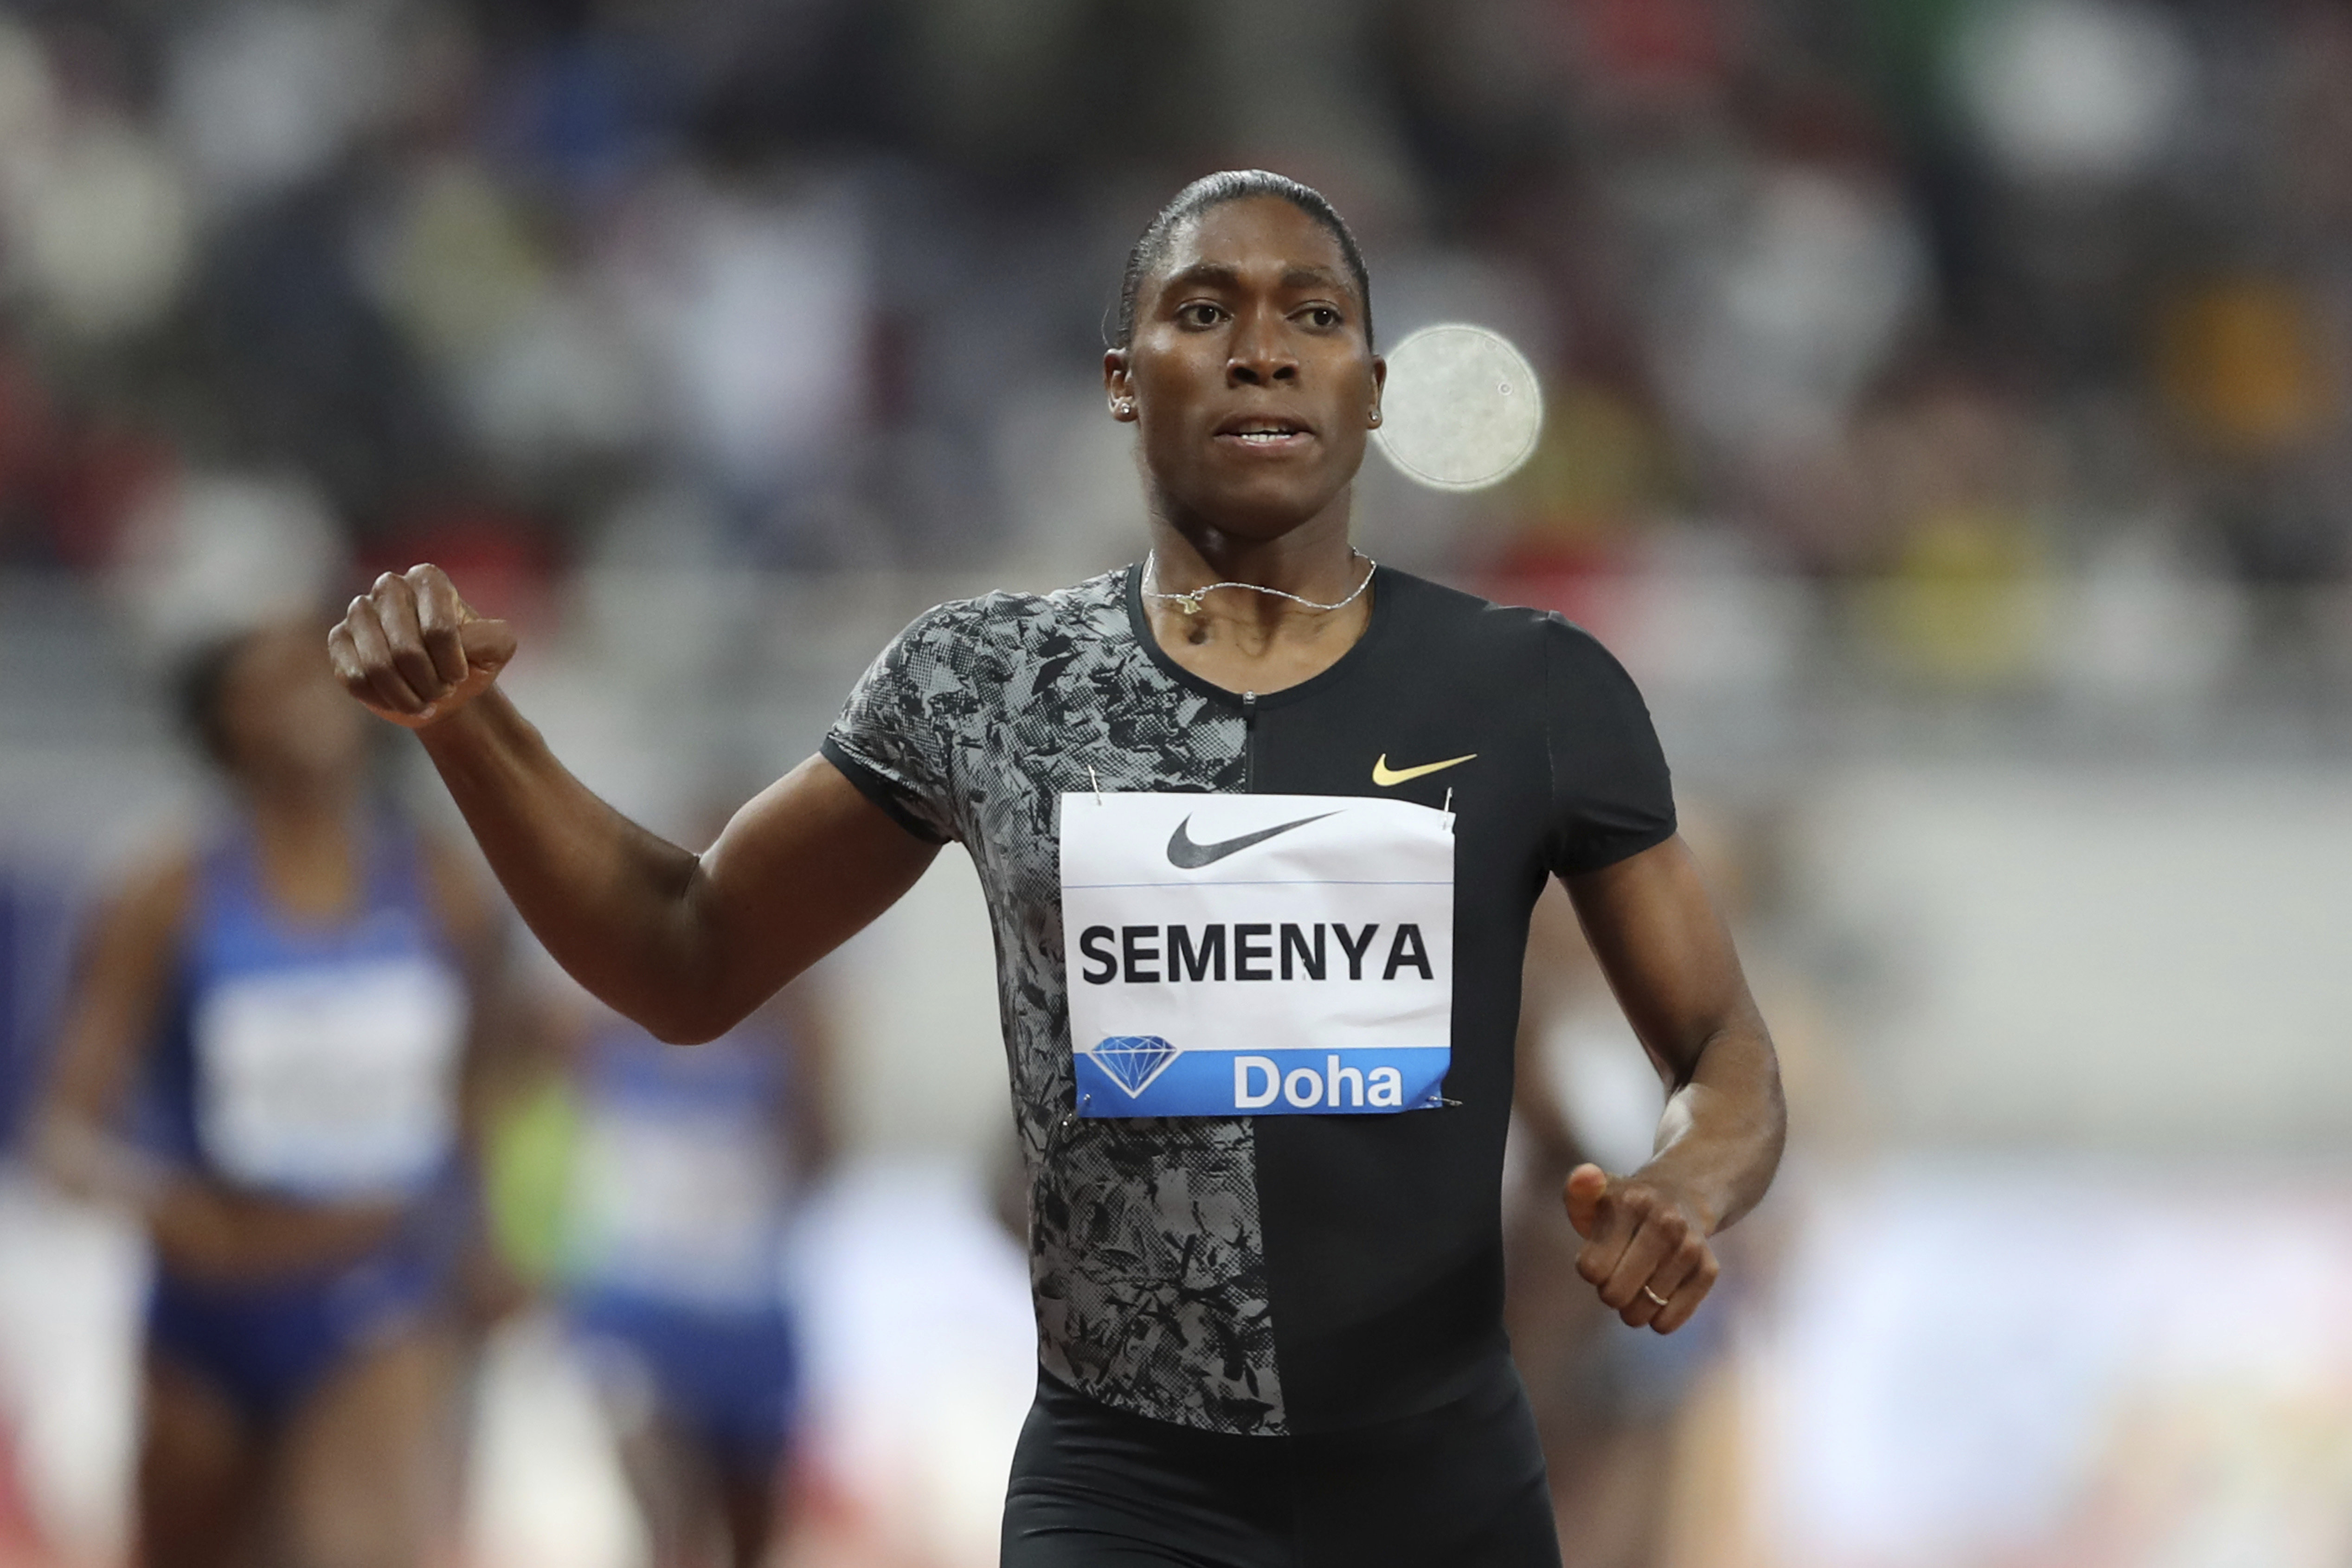 Bedst Maori Ministerium Olympic champion runner Caster Semenya wins appeal against testosterone  rules at human rights court - The Globe and Mail